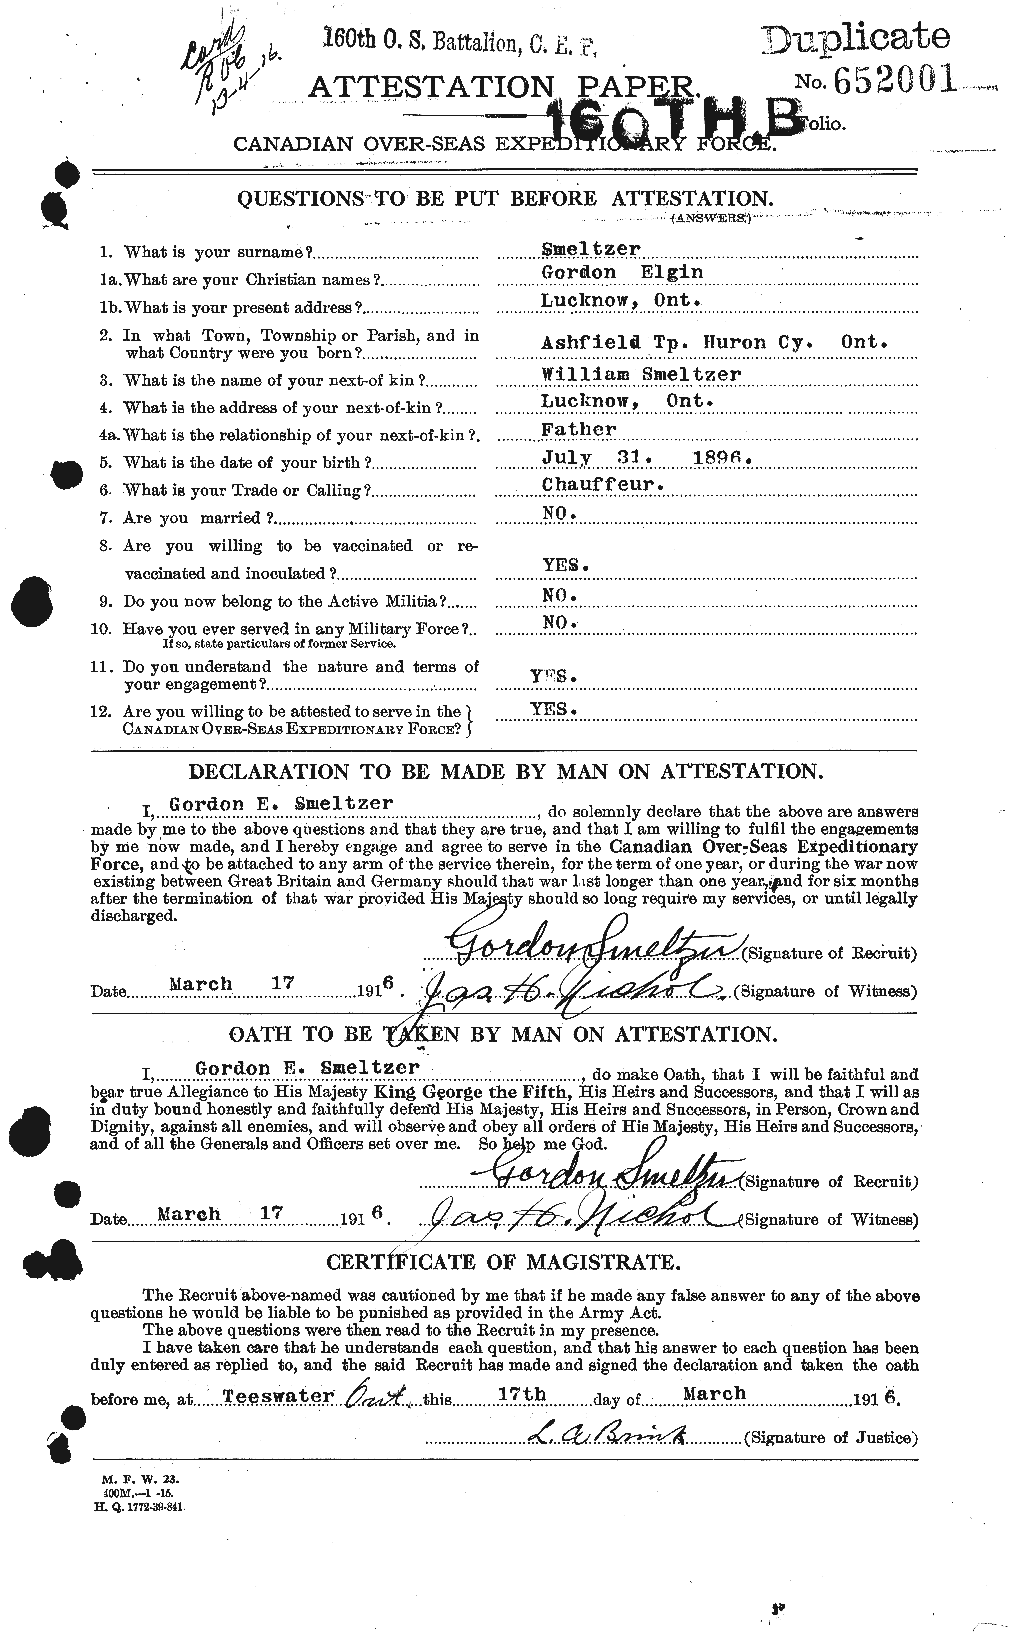 Personnel Records of the First World War - CEF 099818a